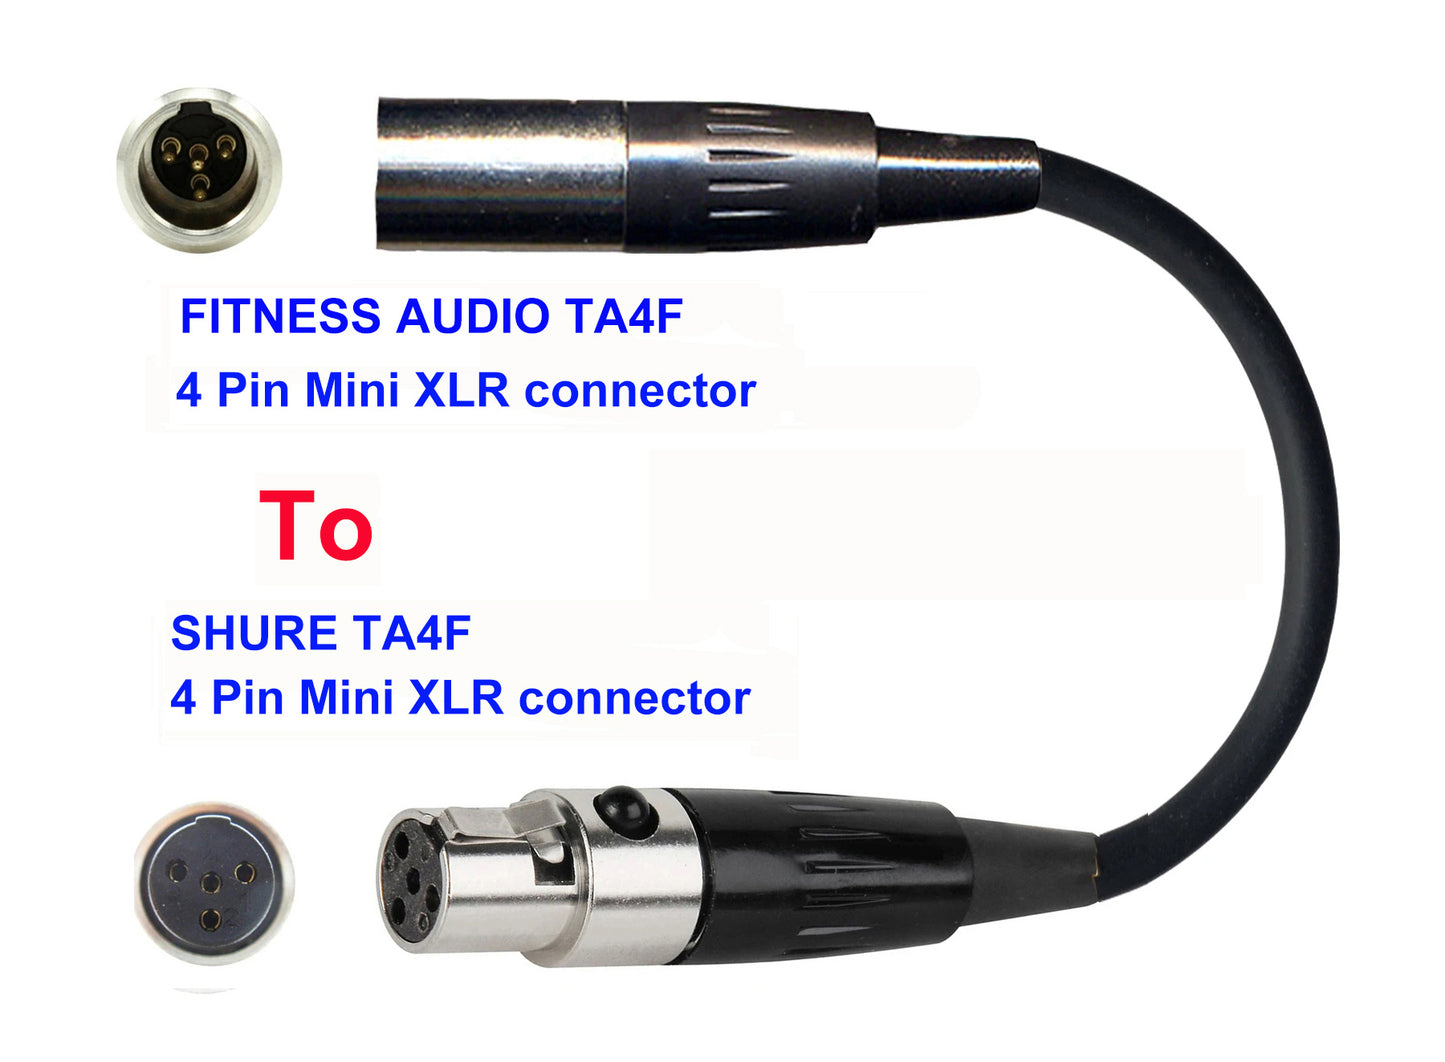 Microphone Adapter - Fitness Audio / Aeromic / Emic Microphones with TA4F 4 pin mini XLR connector TO Shure Transmitters with 4pin TA4M connector